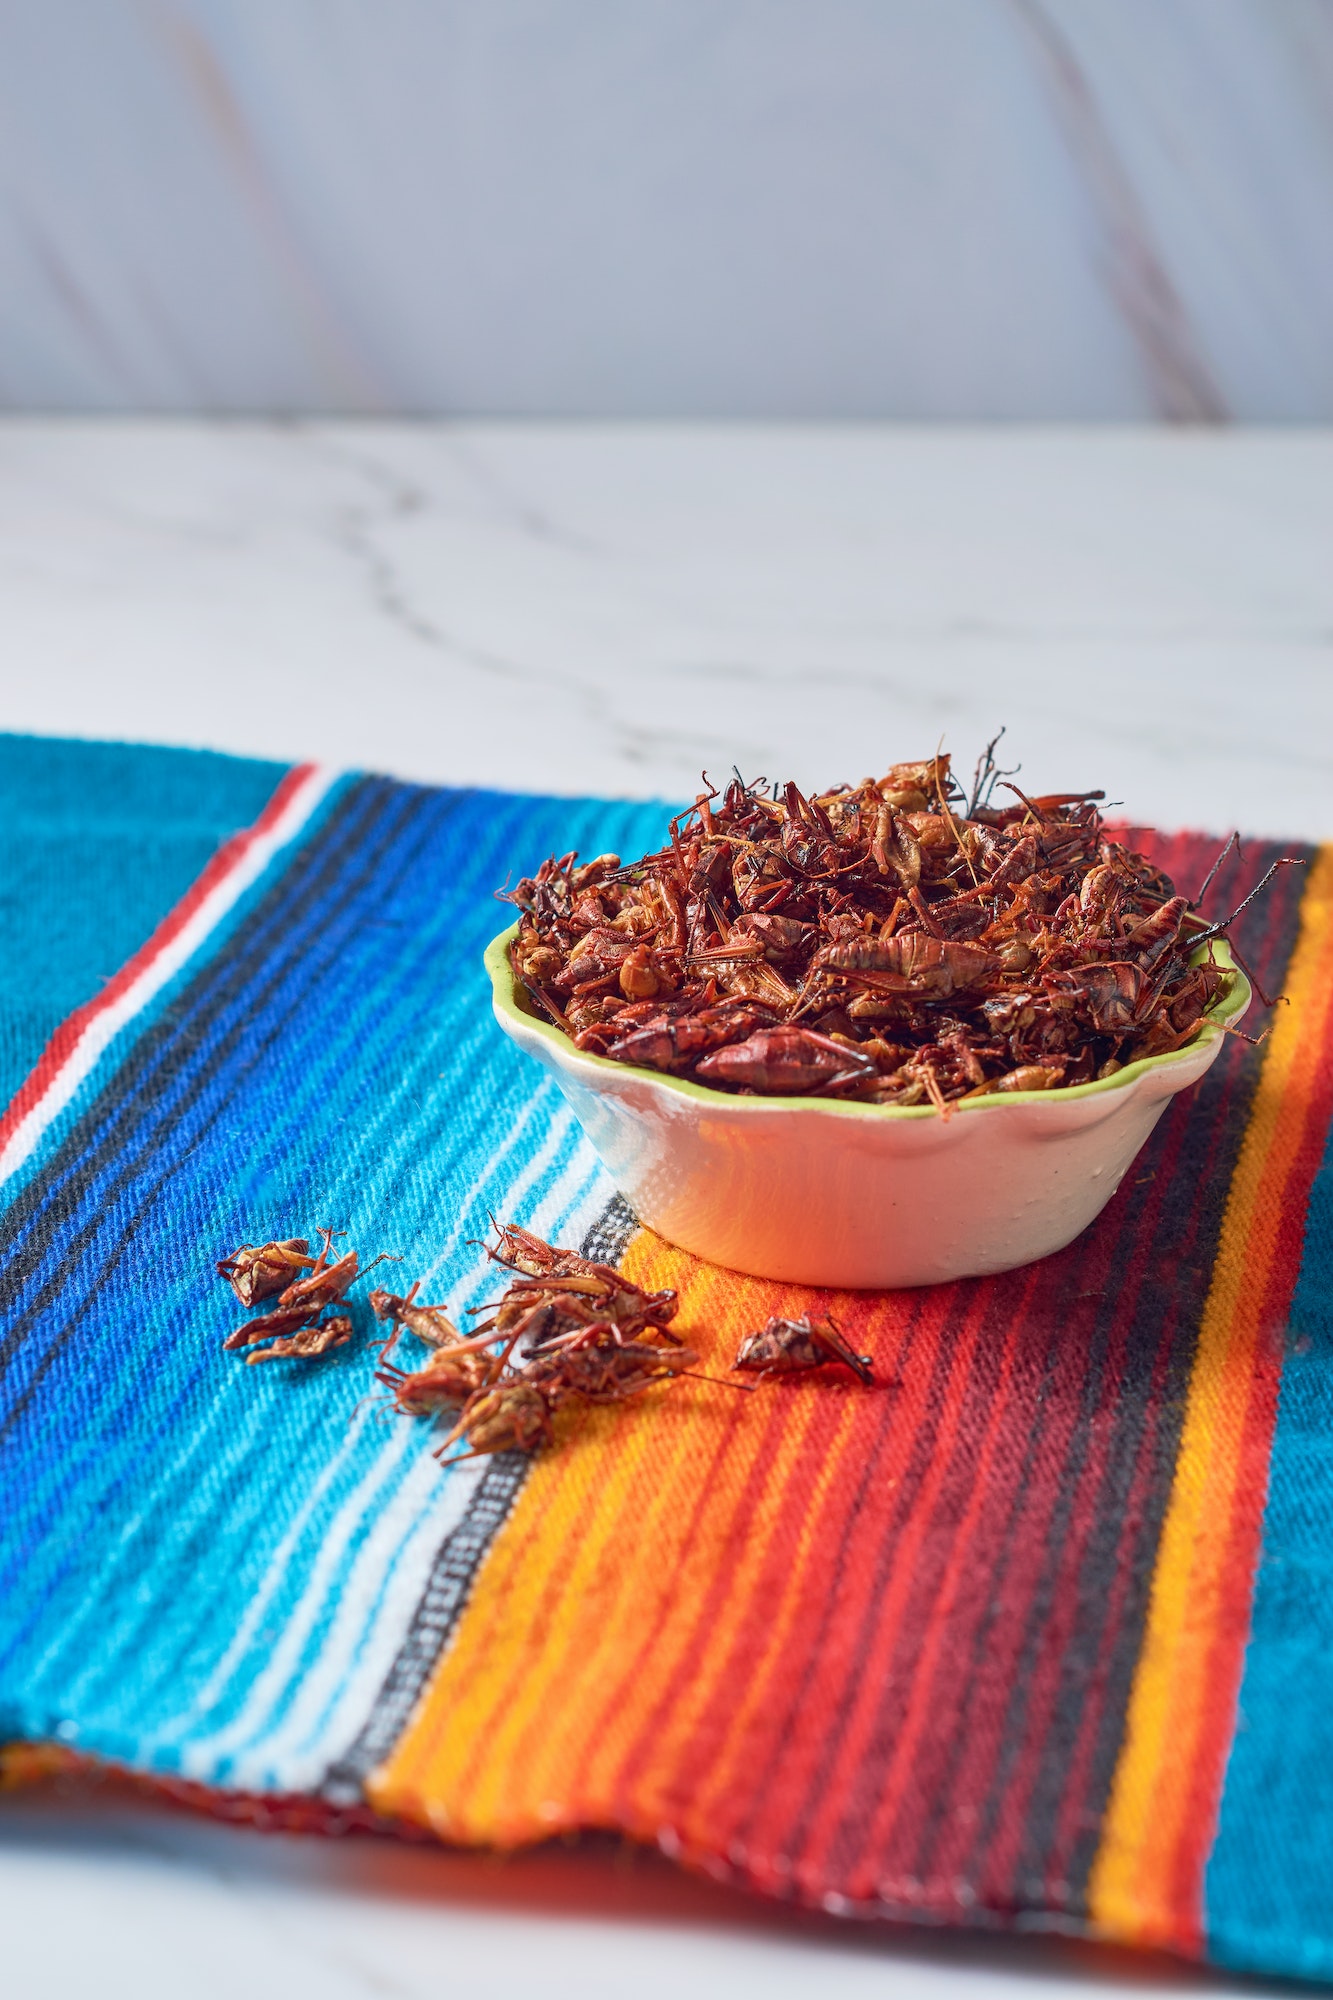 Chapulines or Grasshoppers, traditional snack from Oaxaca Mexico